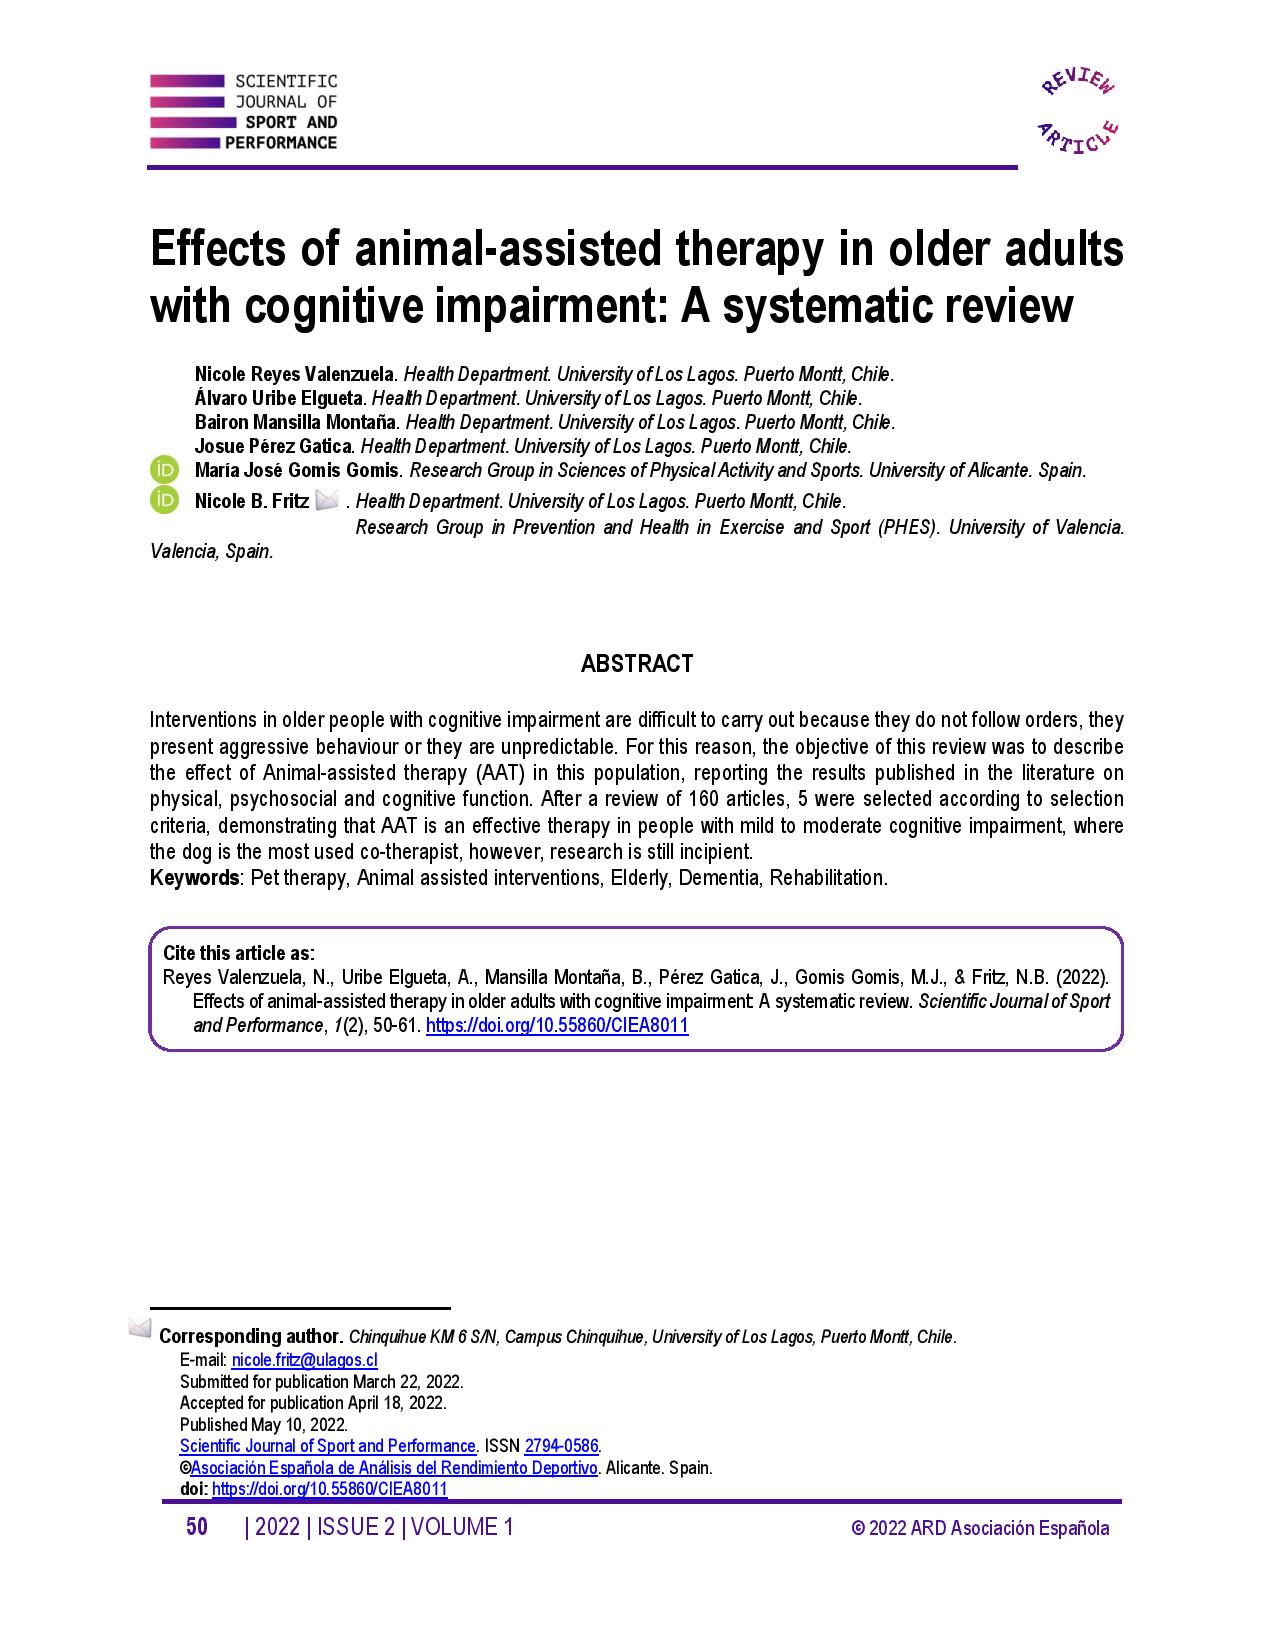 Effects of animal-assisted therapy in older adults with cognitive impairment: A systematic review